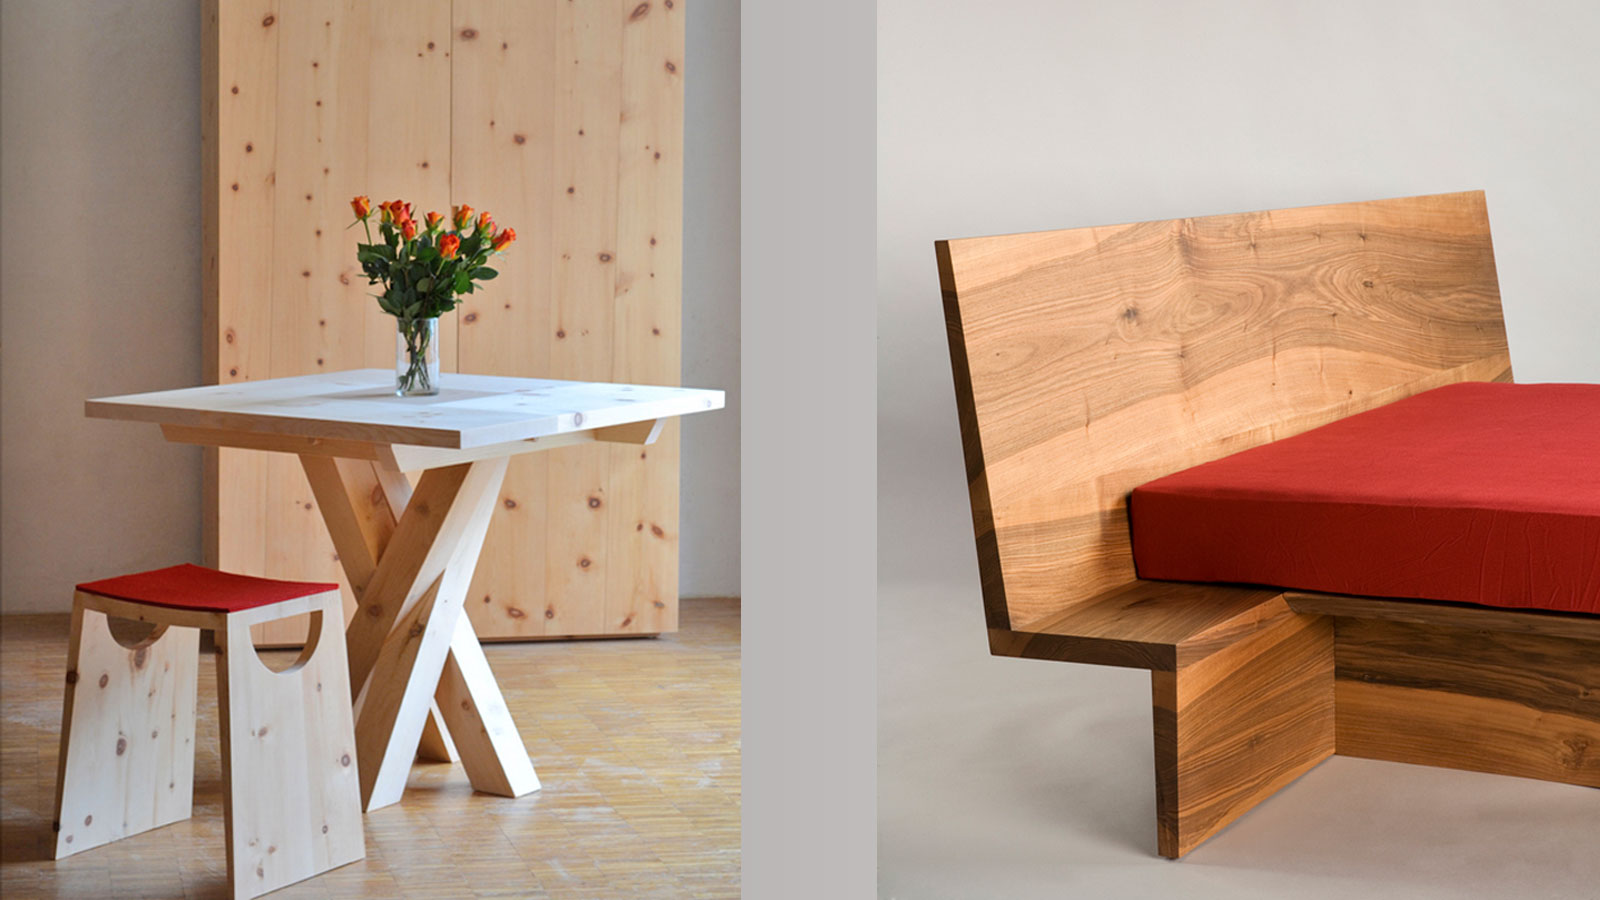 Table, stool and bed in Engadine pine wood by David Rohrbach, Zernez Switzerland